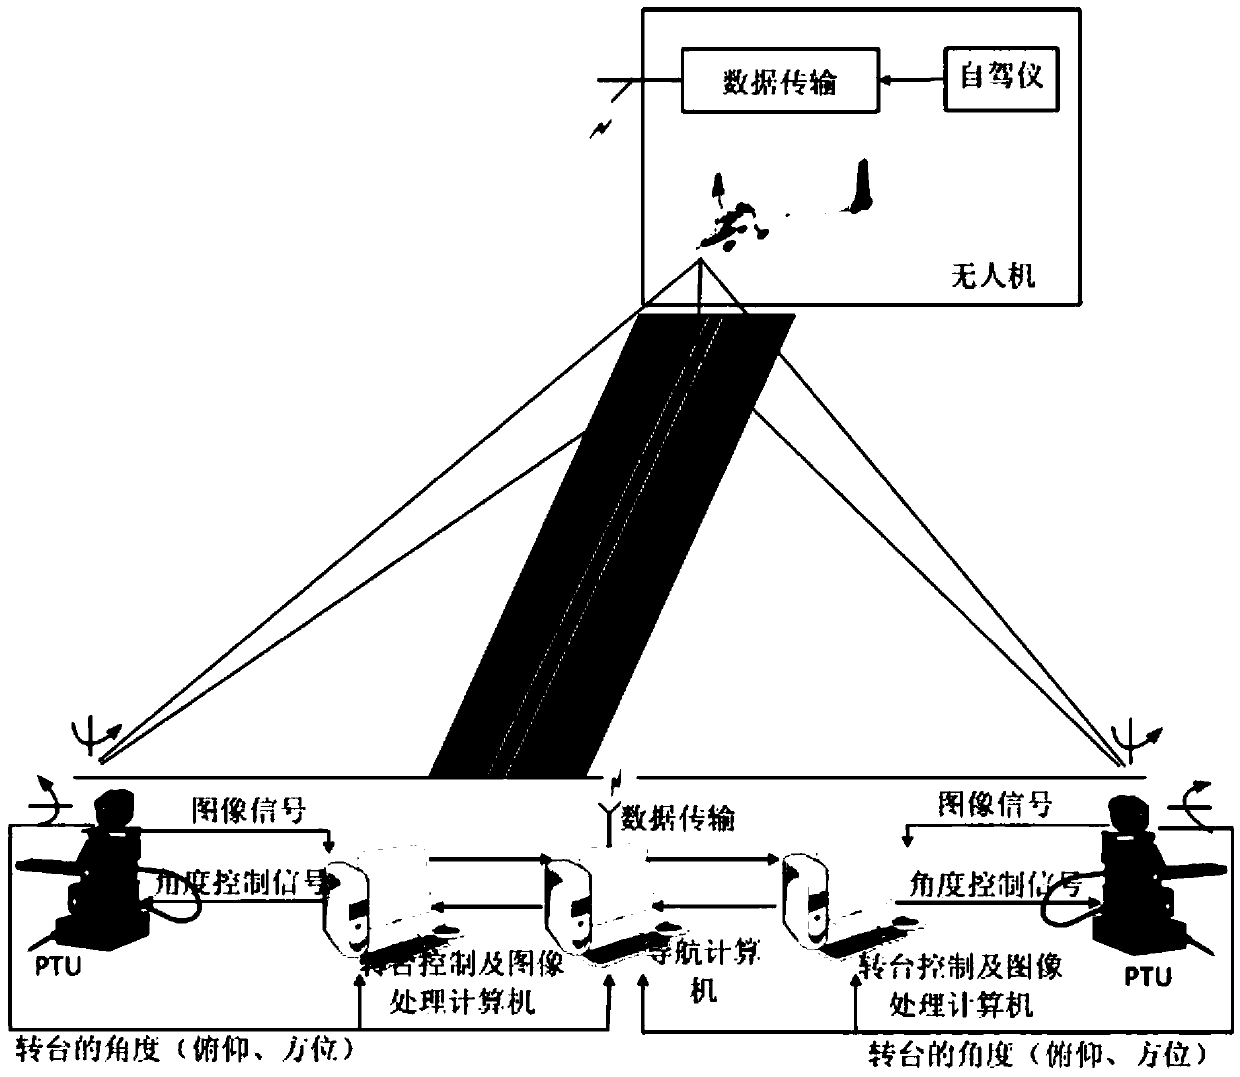 Infrared vision based automatic landing guidance method and system applied to fixed-wing UAV (unmanned aerial vehicle)